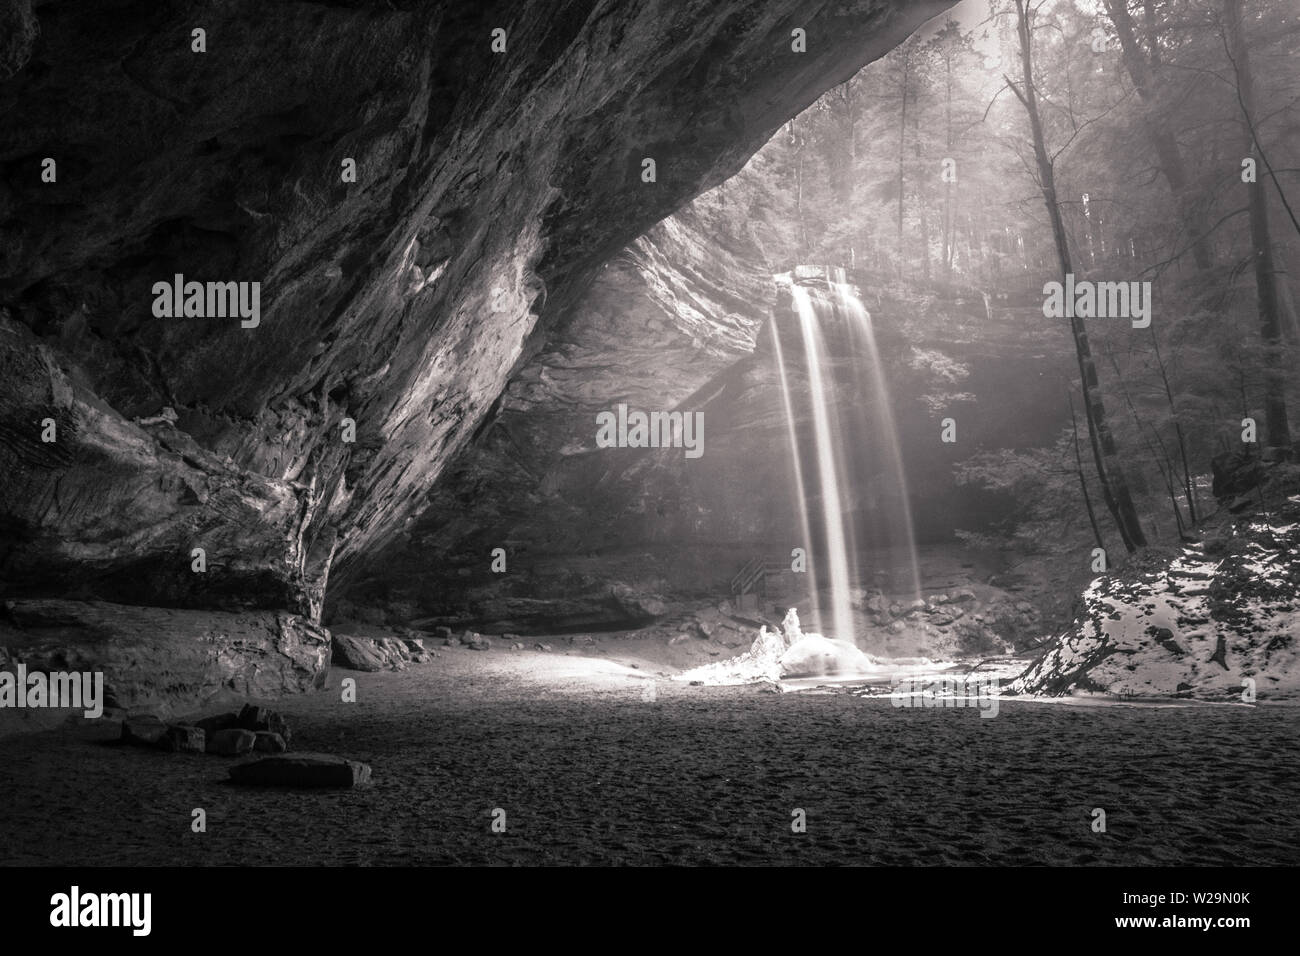 Mystical Forest Waterfall In Black And White. Springtime arrives to Hocking Hills State Park as snow begins to melt Stock Photo